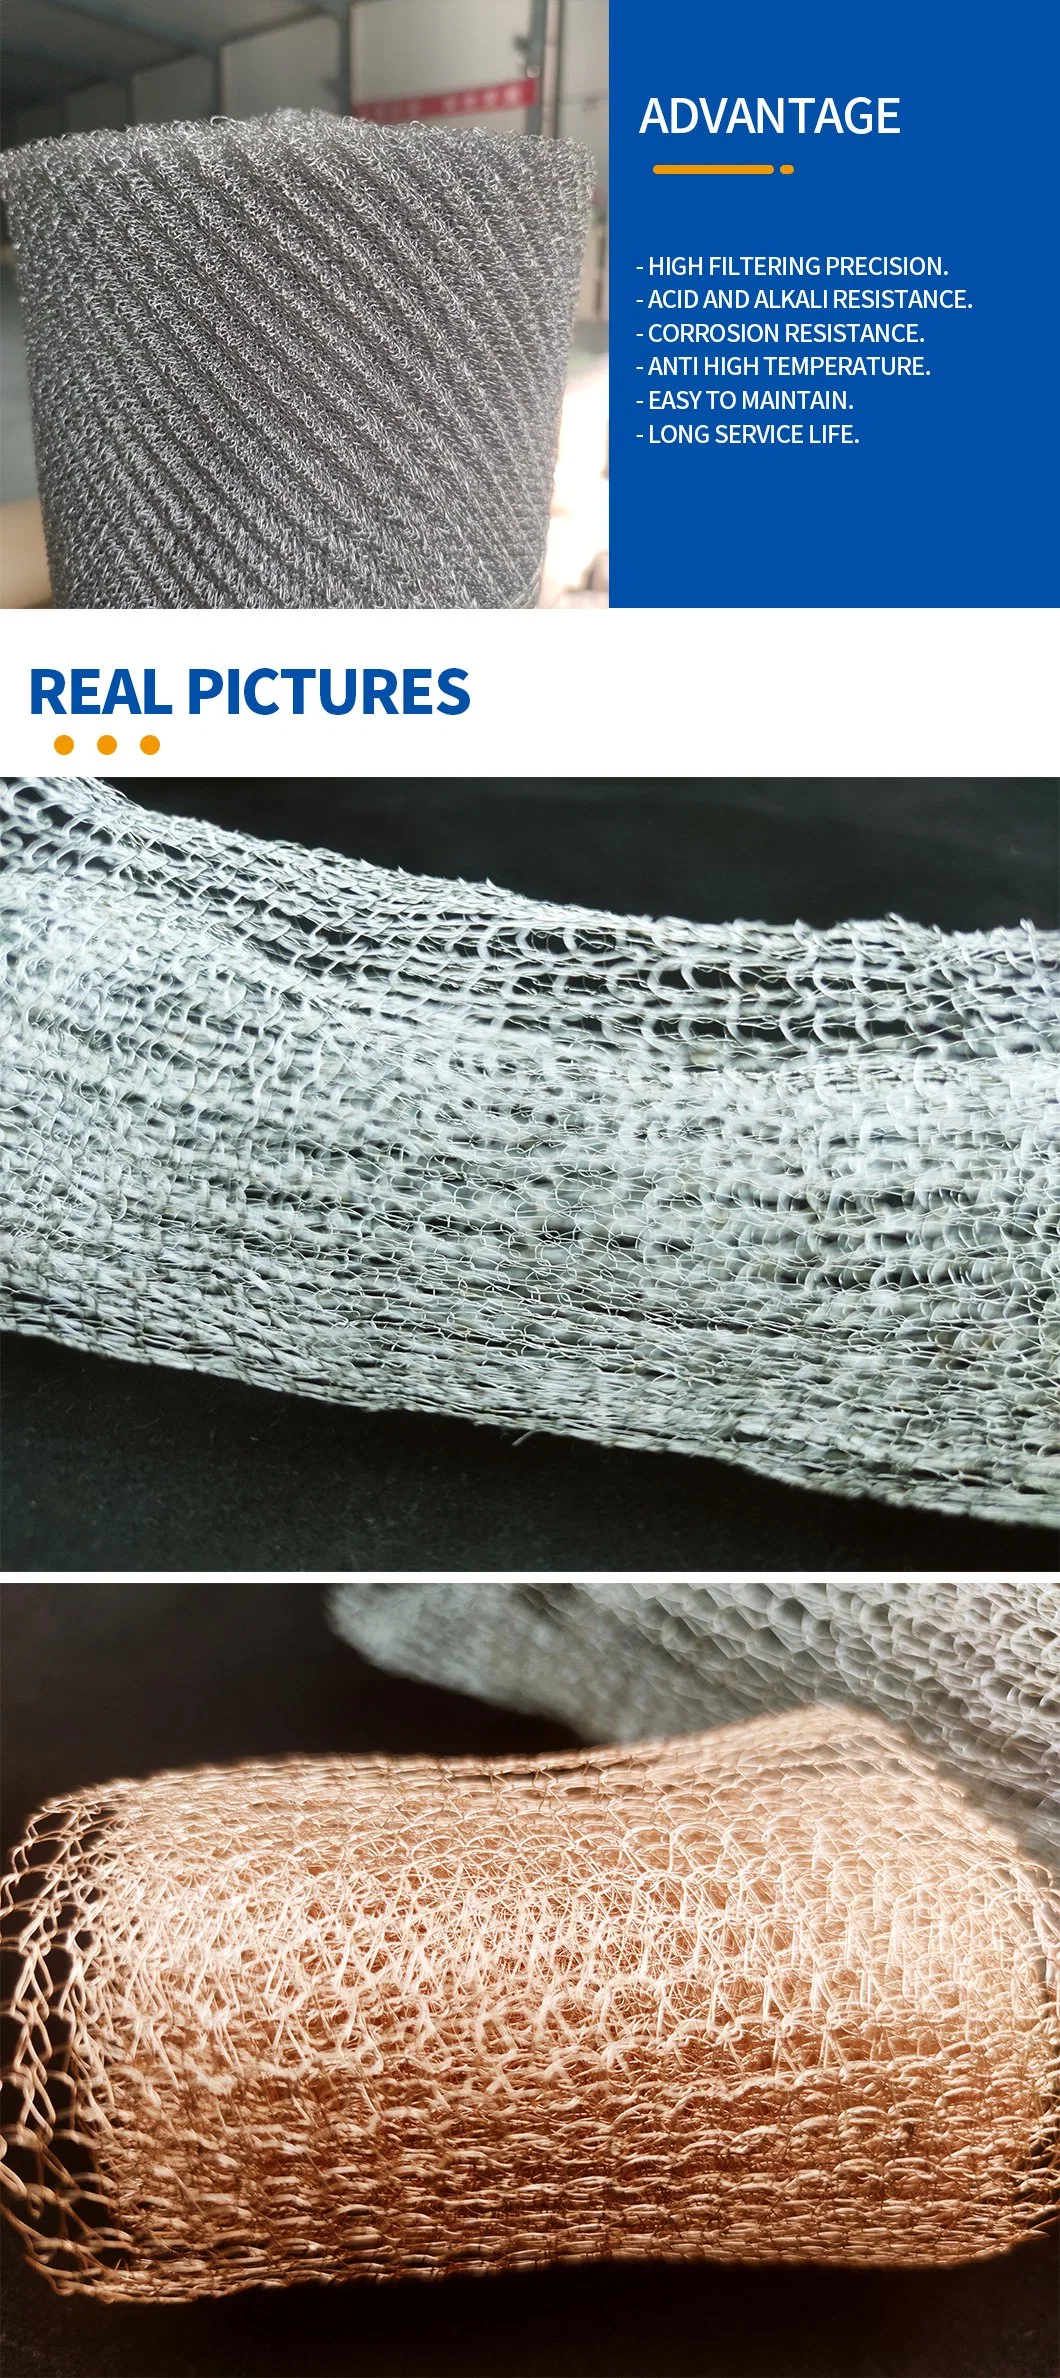 Gas and Liquid Filter Element Knitted Woven Wire Mesh